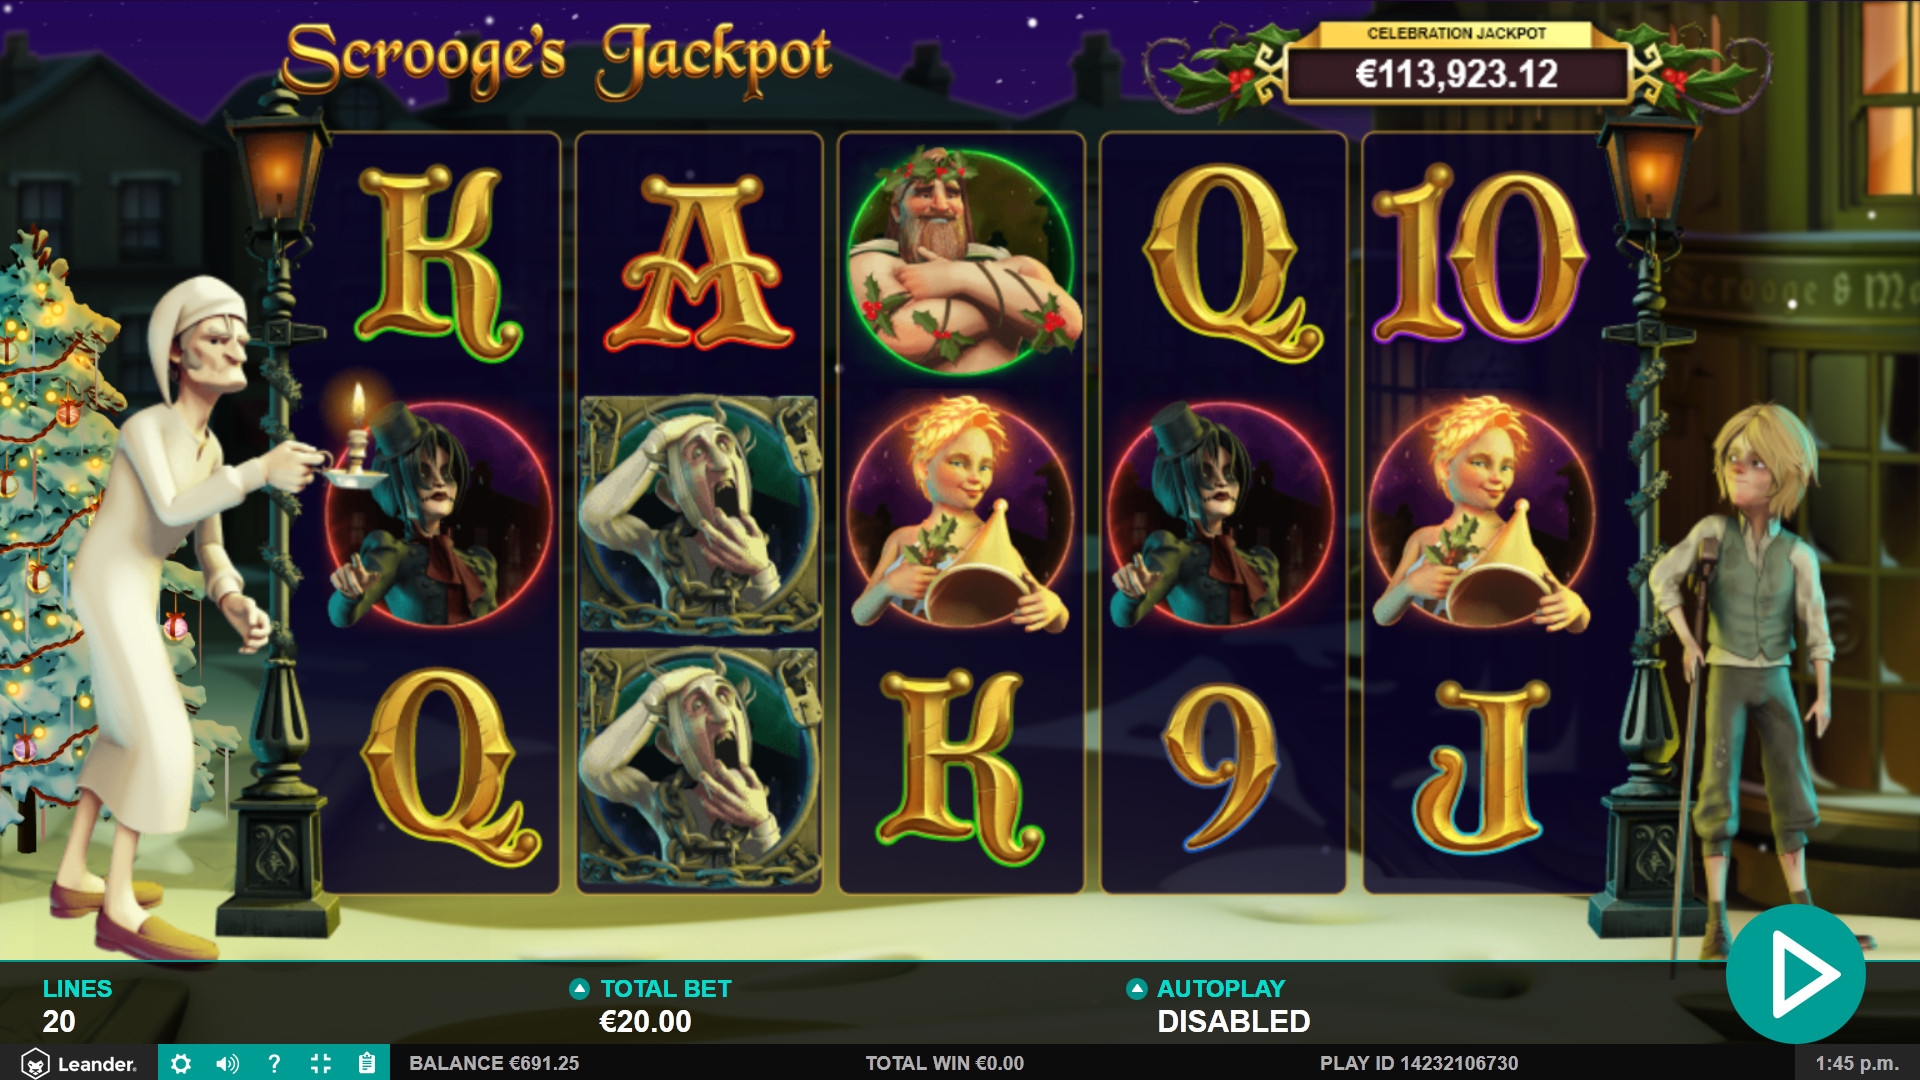 Scrooge’s Jackpot (Scrooge’s Jackpot) from category Slots